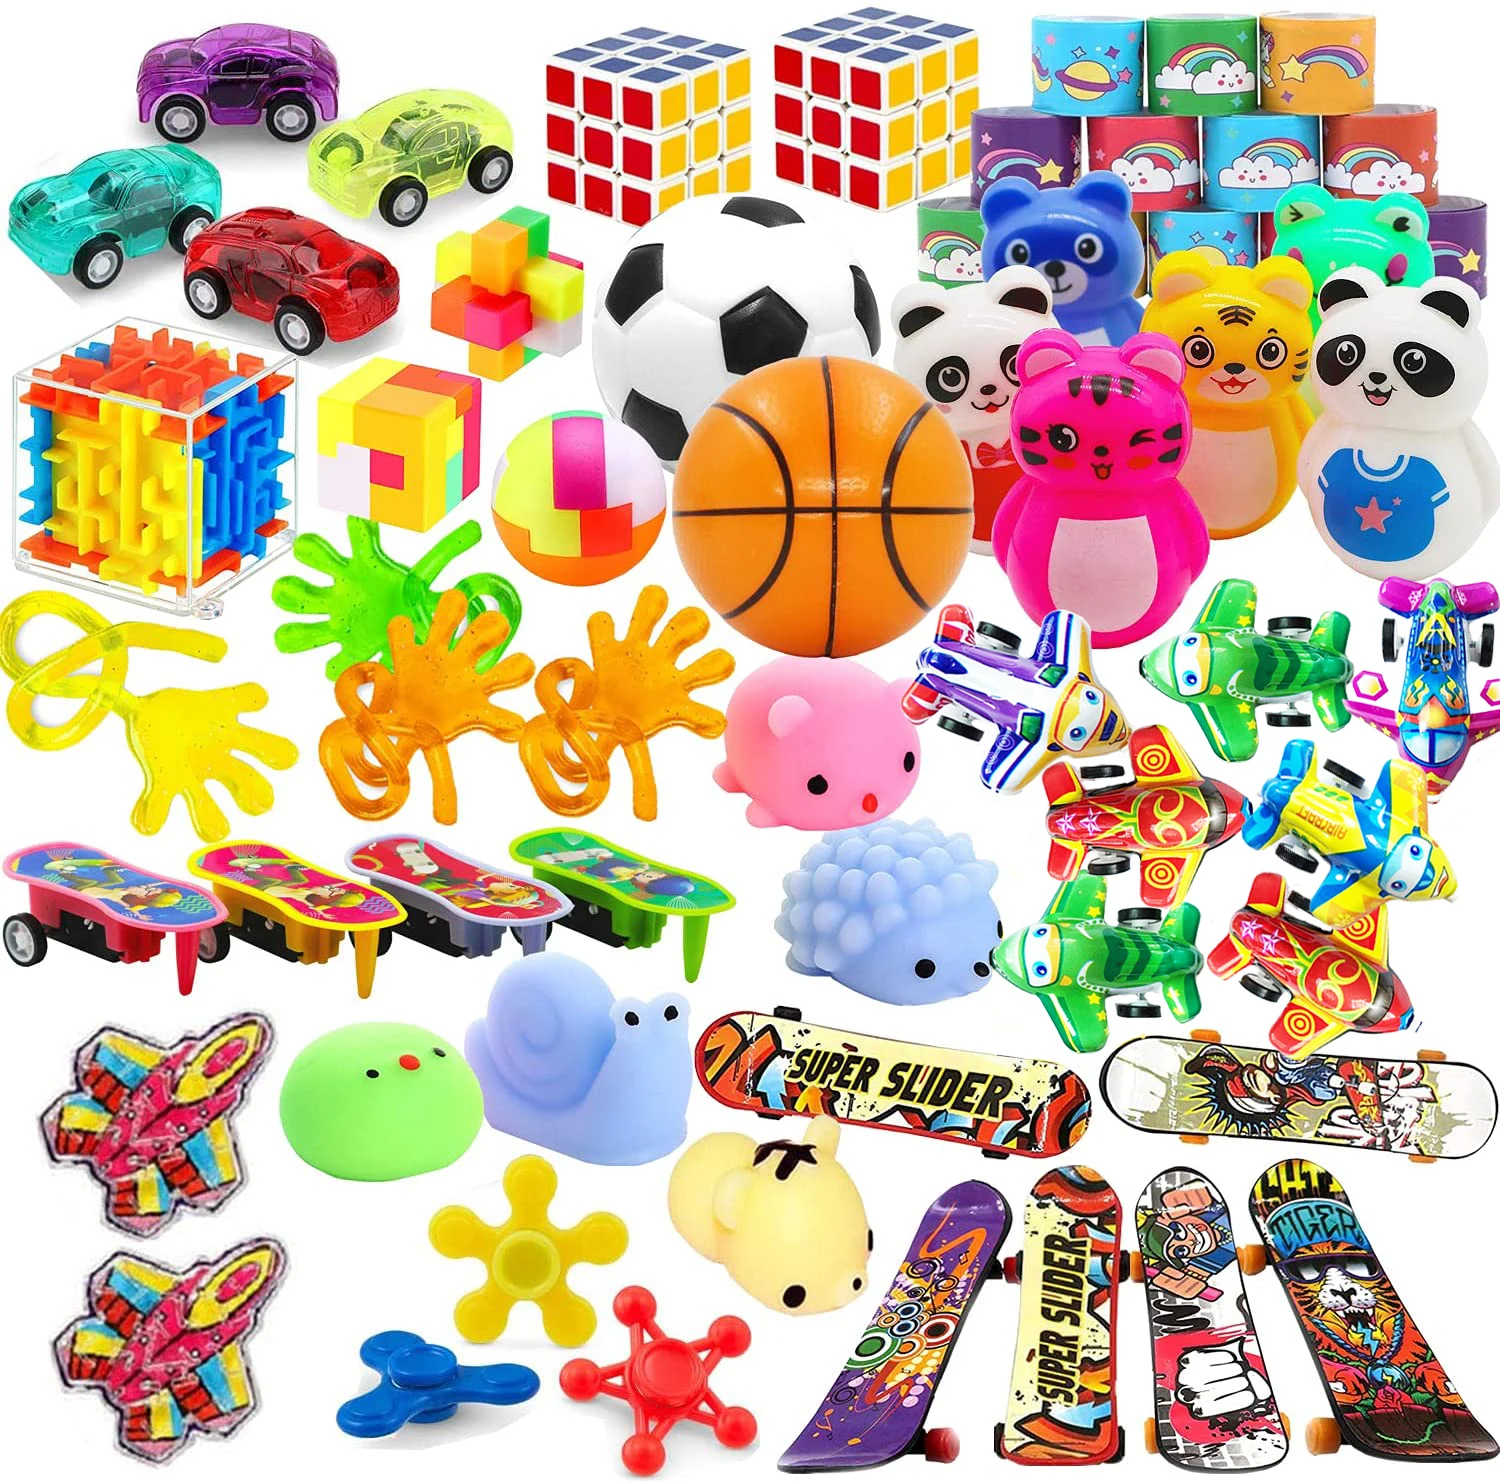 

52 Pcs Kids Birthday Party Favor Football Maze Toys for Pinata Filler Baby Shower Gift Game Goodie Bag Carnival Prizes